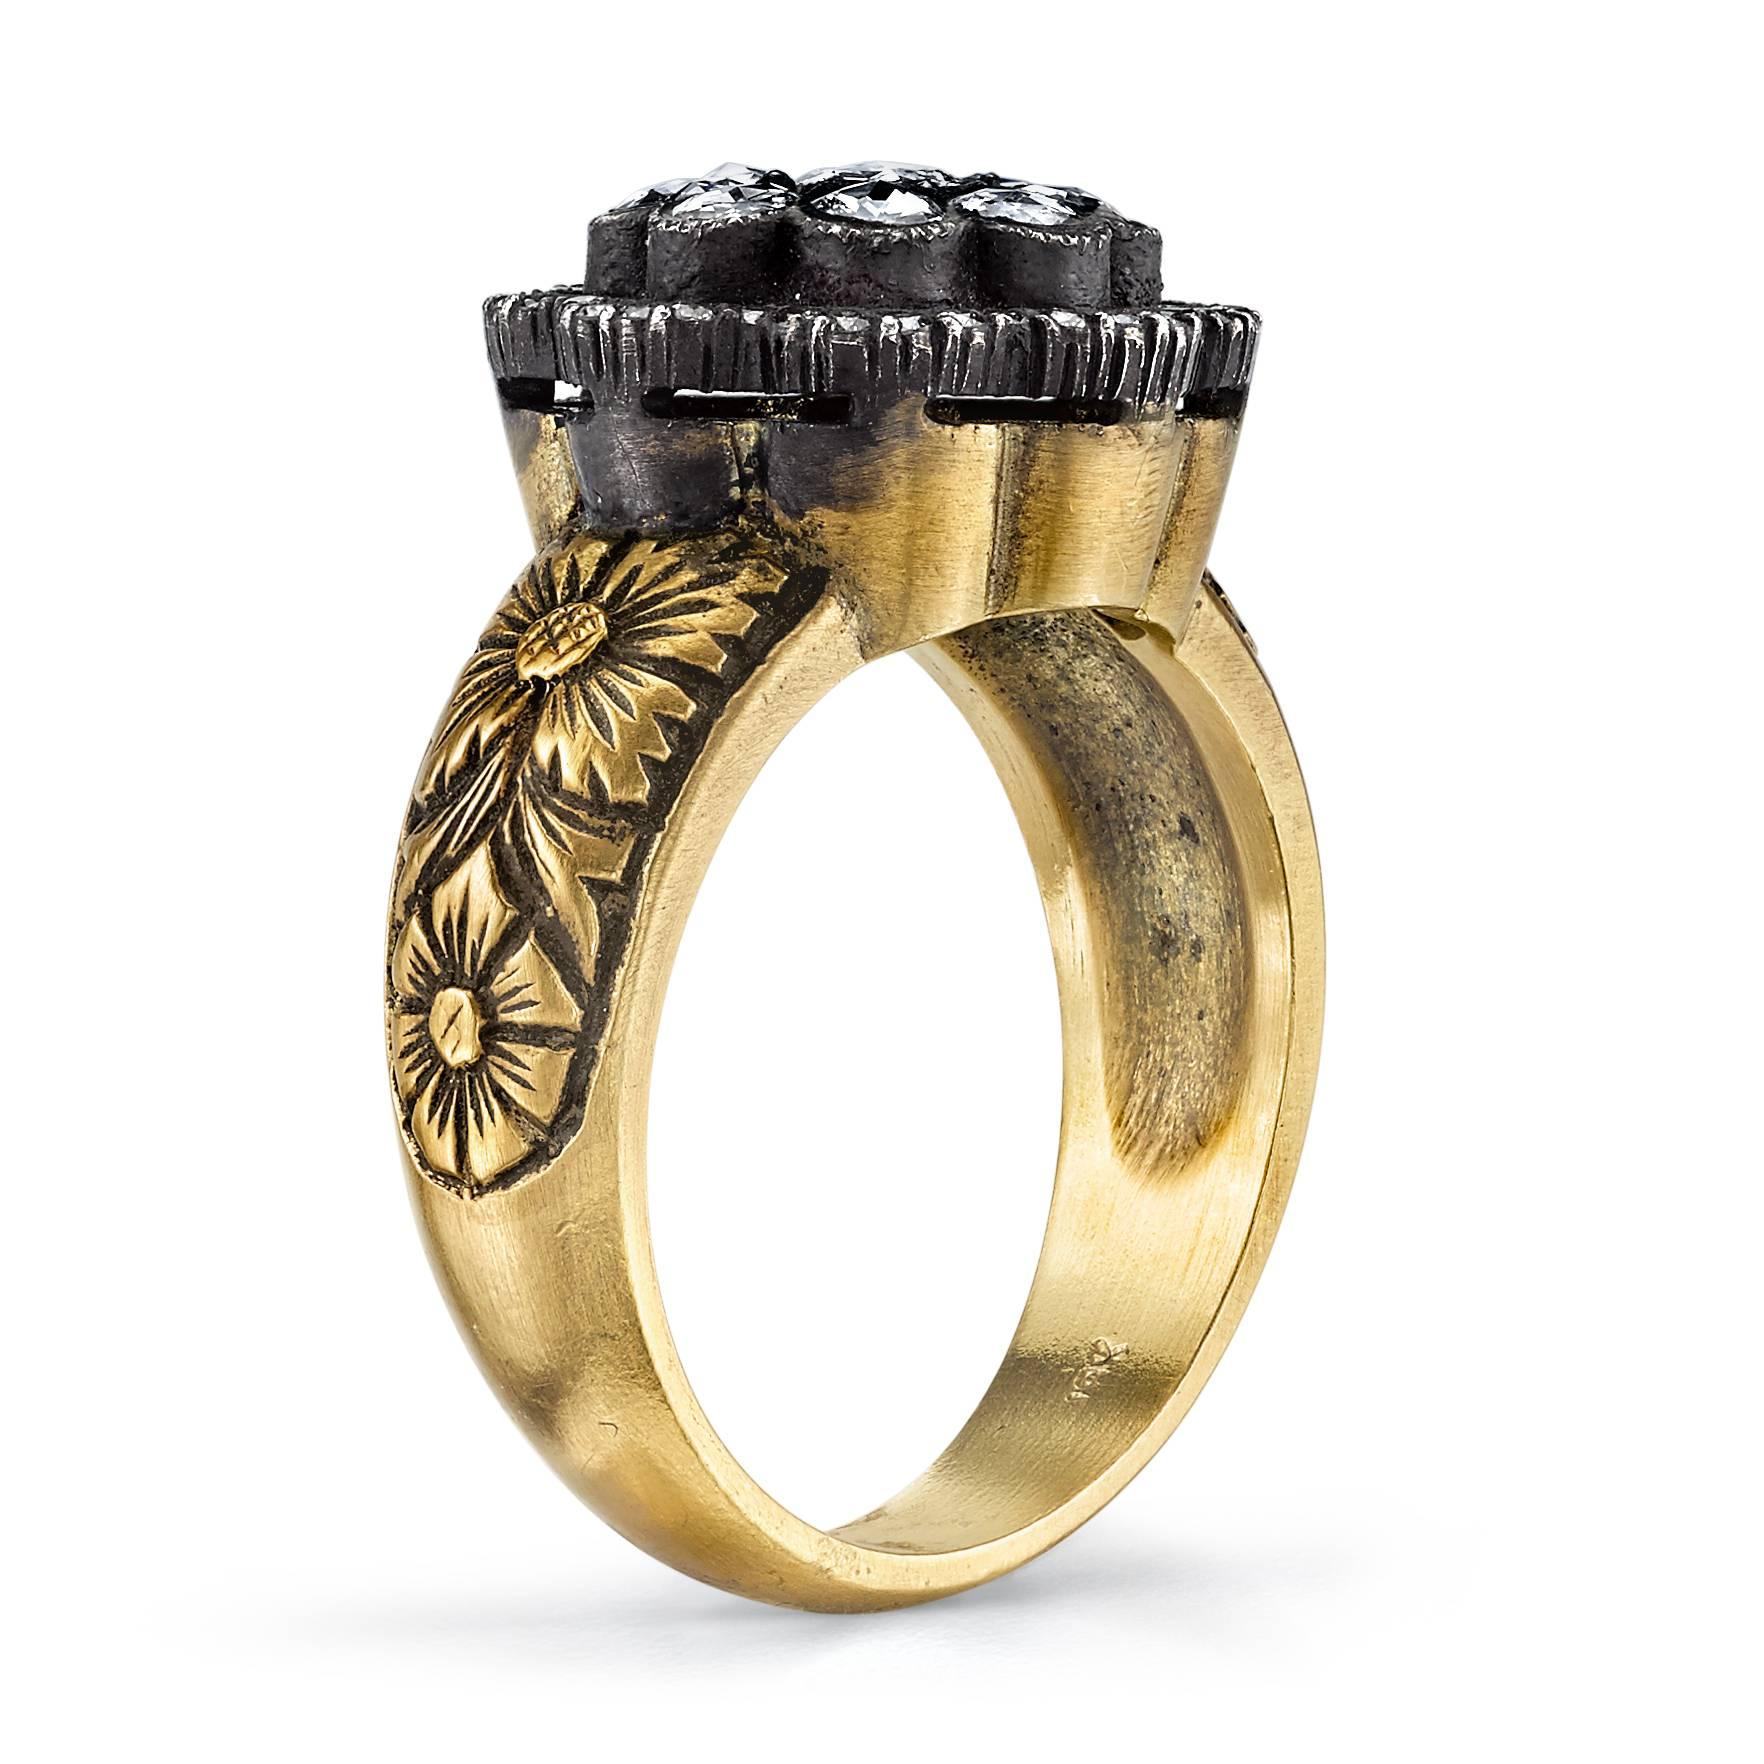 18 Karat Yellow Gold and 0.56 CT Rose Cut Diamond Ring. This ring features a beautiful engraving throughout the band and an antique, silver patina finish.  

Inspired by the Edwardian Era, a time when fine jewelry was a crucial component of every